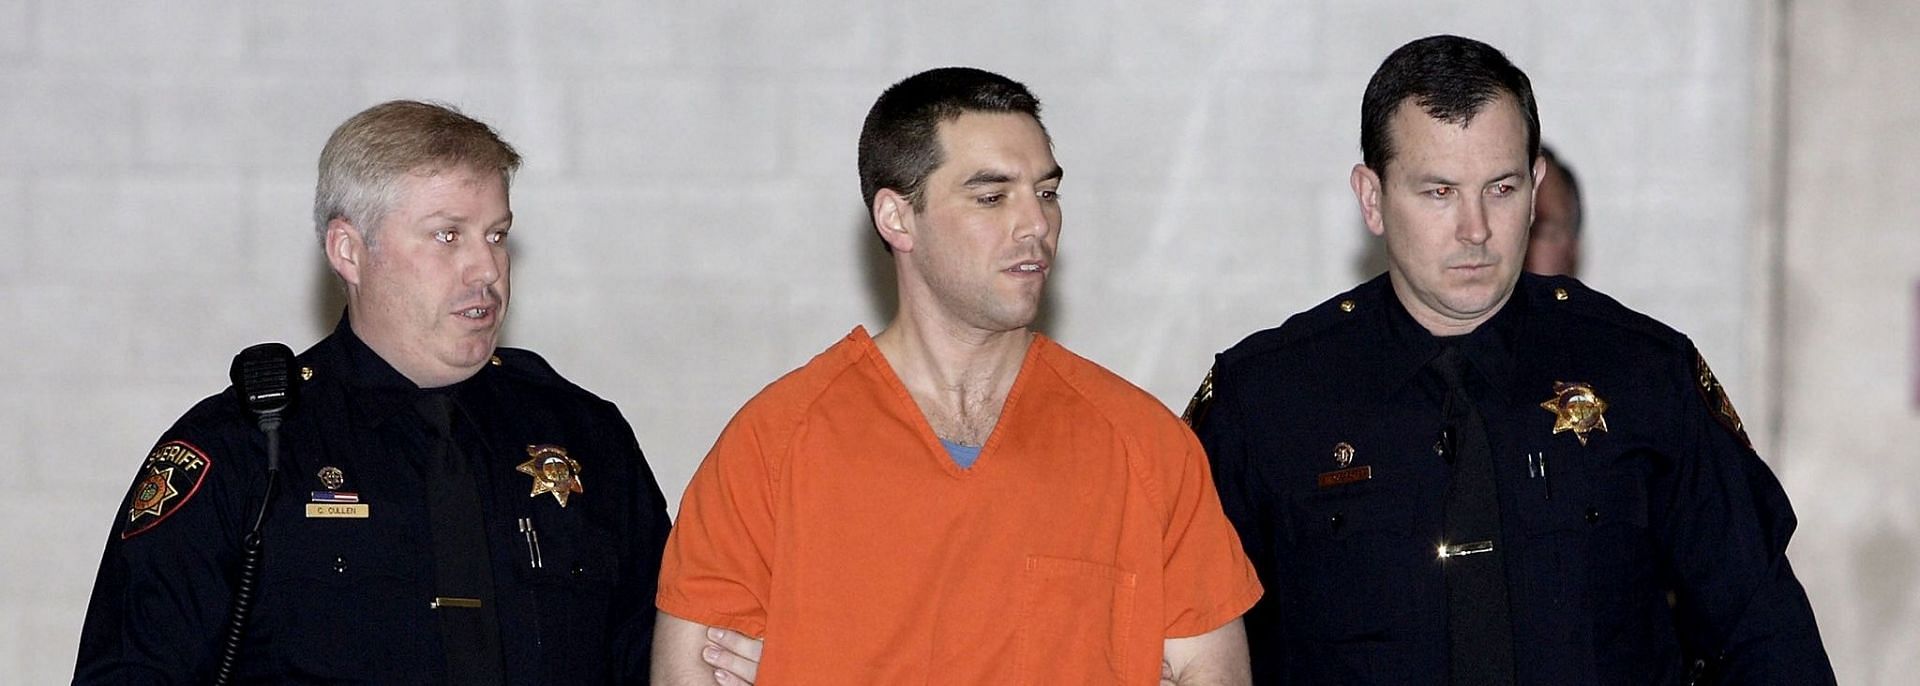 Scott Peterson was convicted for the murder of his wife Laci Peterson and their unborn child (Image via Getty Images/Justin Sullivan)